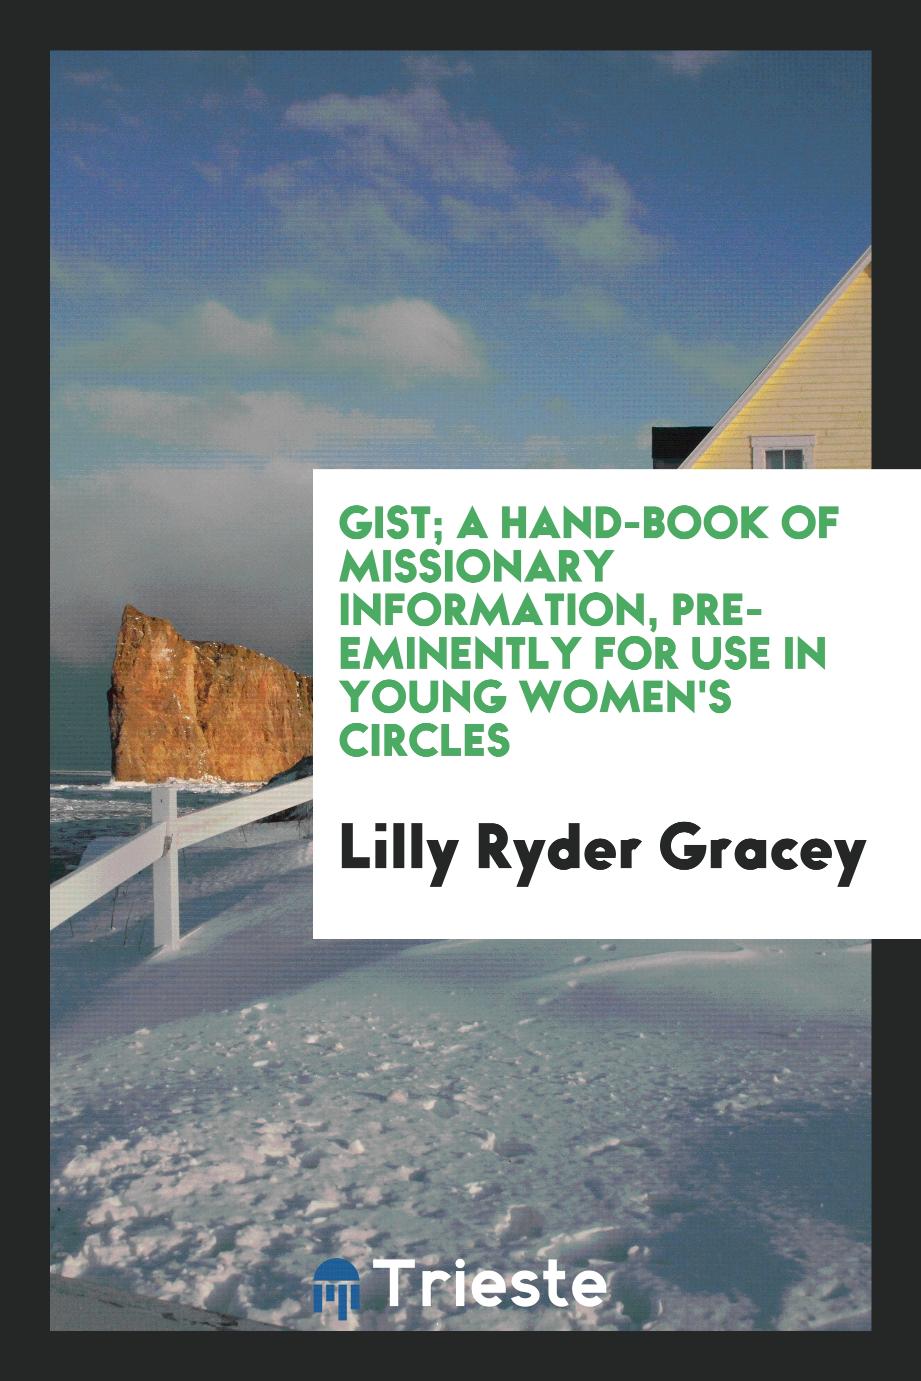 Gist; a hand-book of missionary information, pre-eminently for use in young women's circles